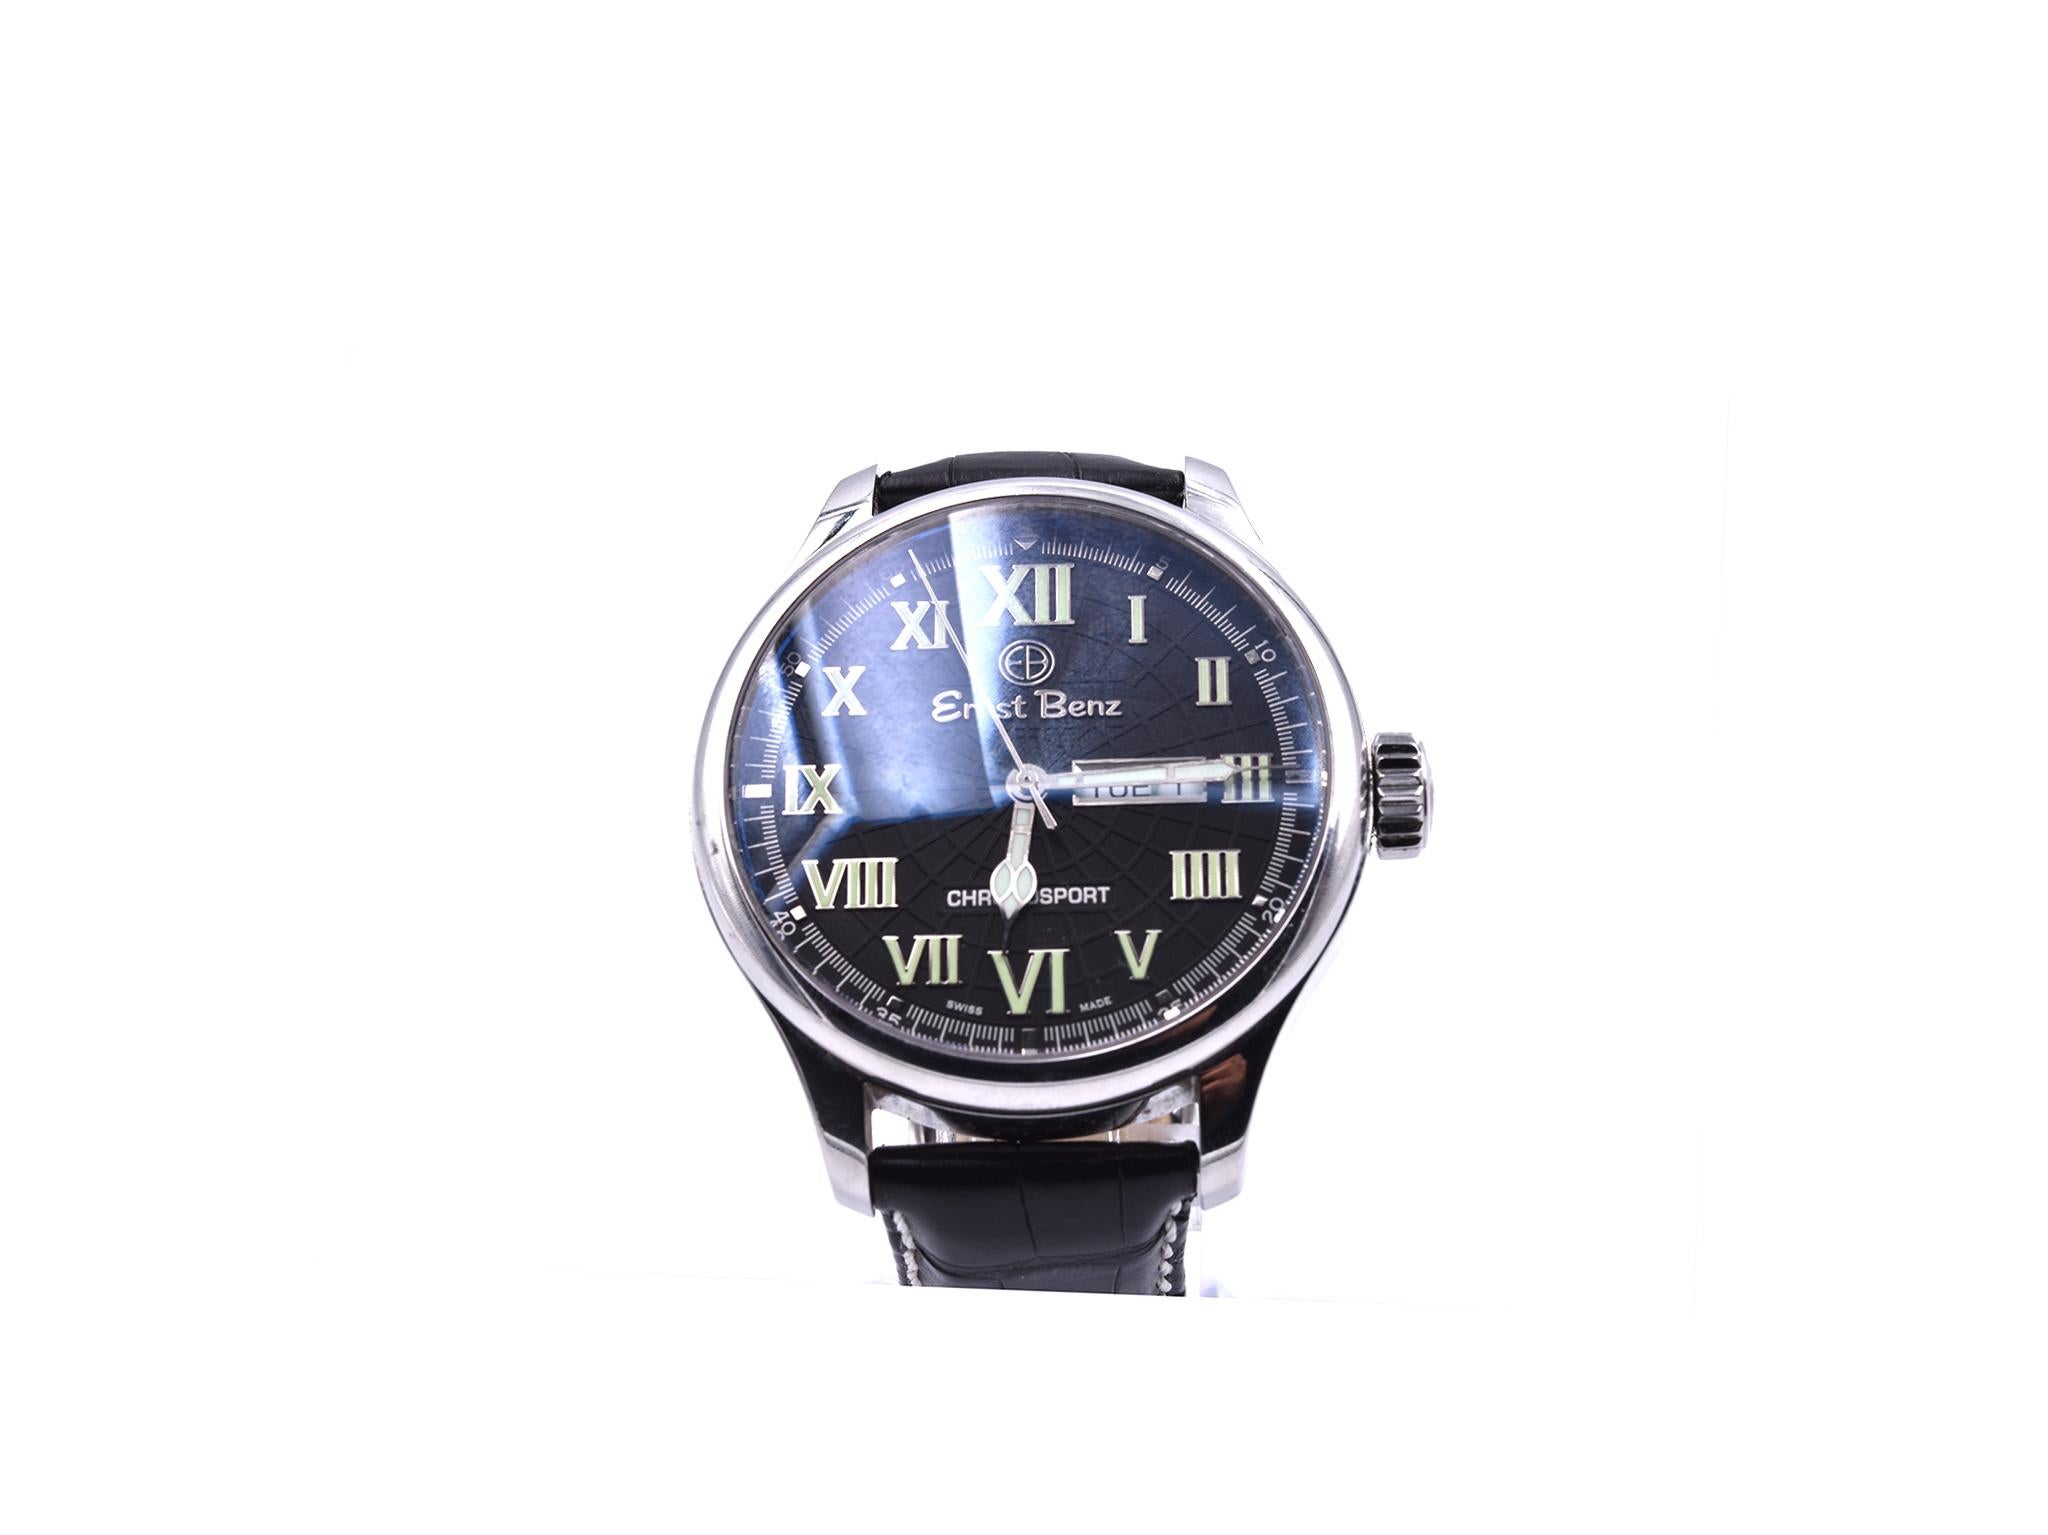 Movement: automatic ETA2836-2
Function: hours, minutes, sweep seconds, day and date
Case: 47mm polished stainless steel case, with exhibition back, sapphire crystal
Band: black alligator with stainless steel buckle
Dial: black with white minute